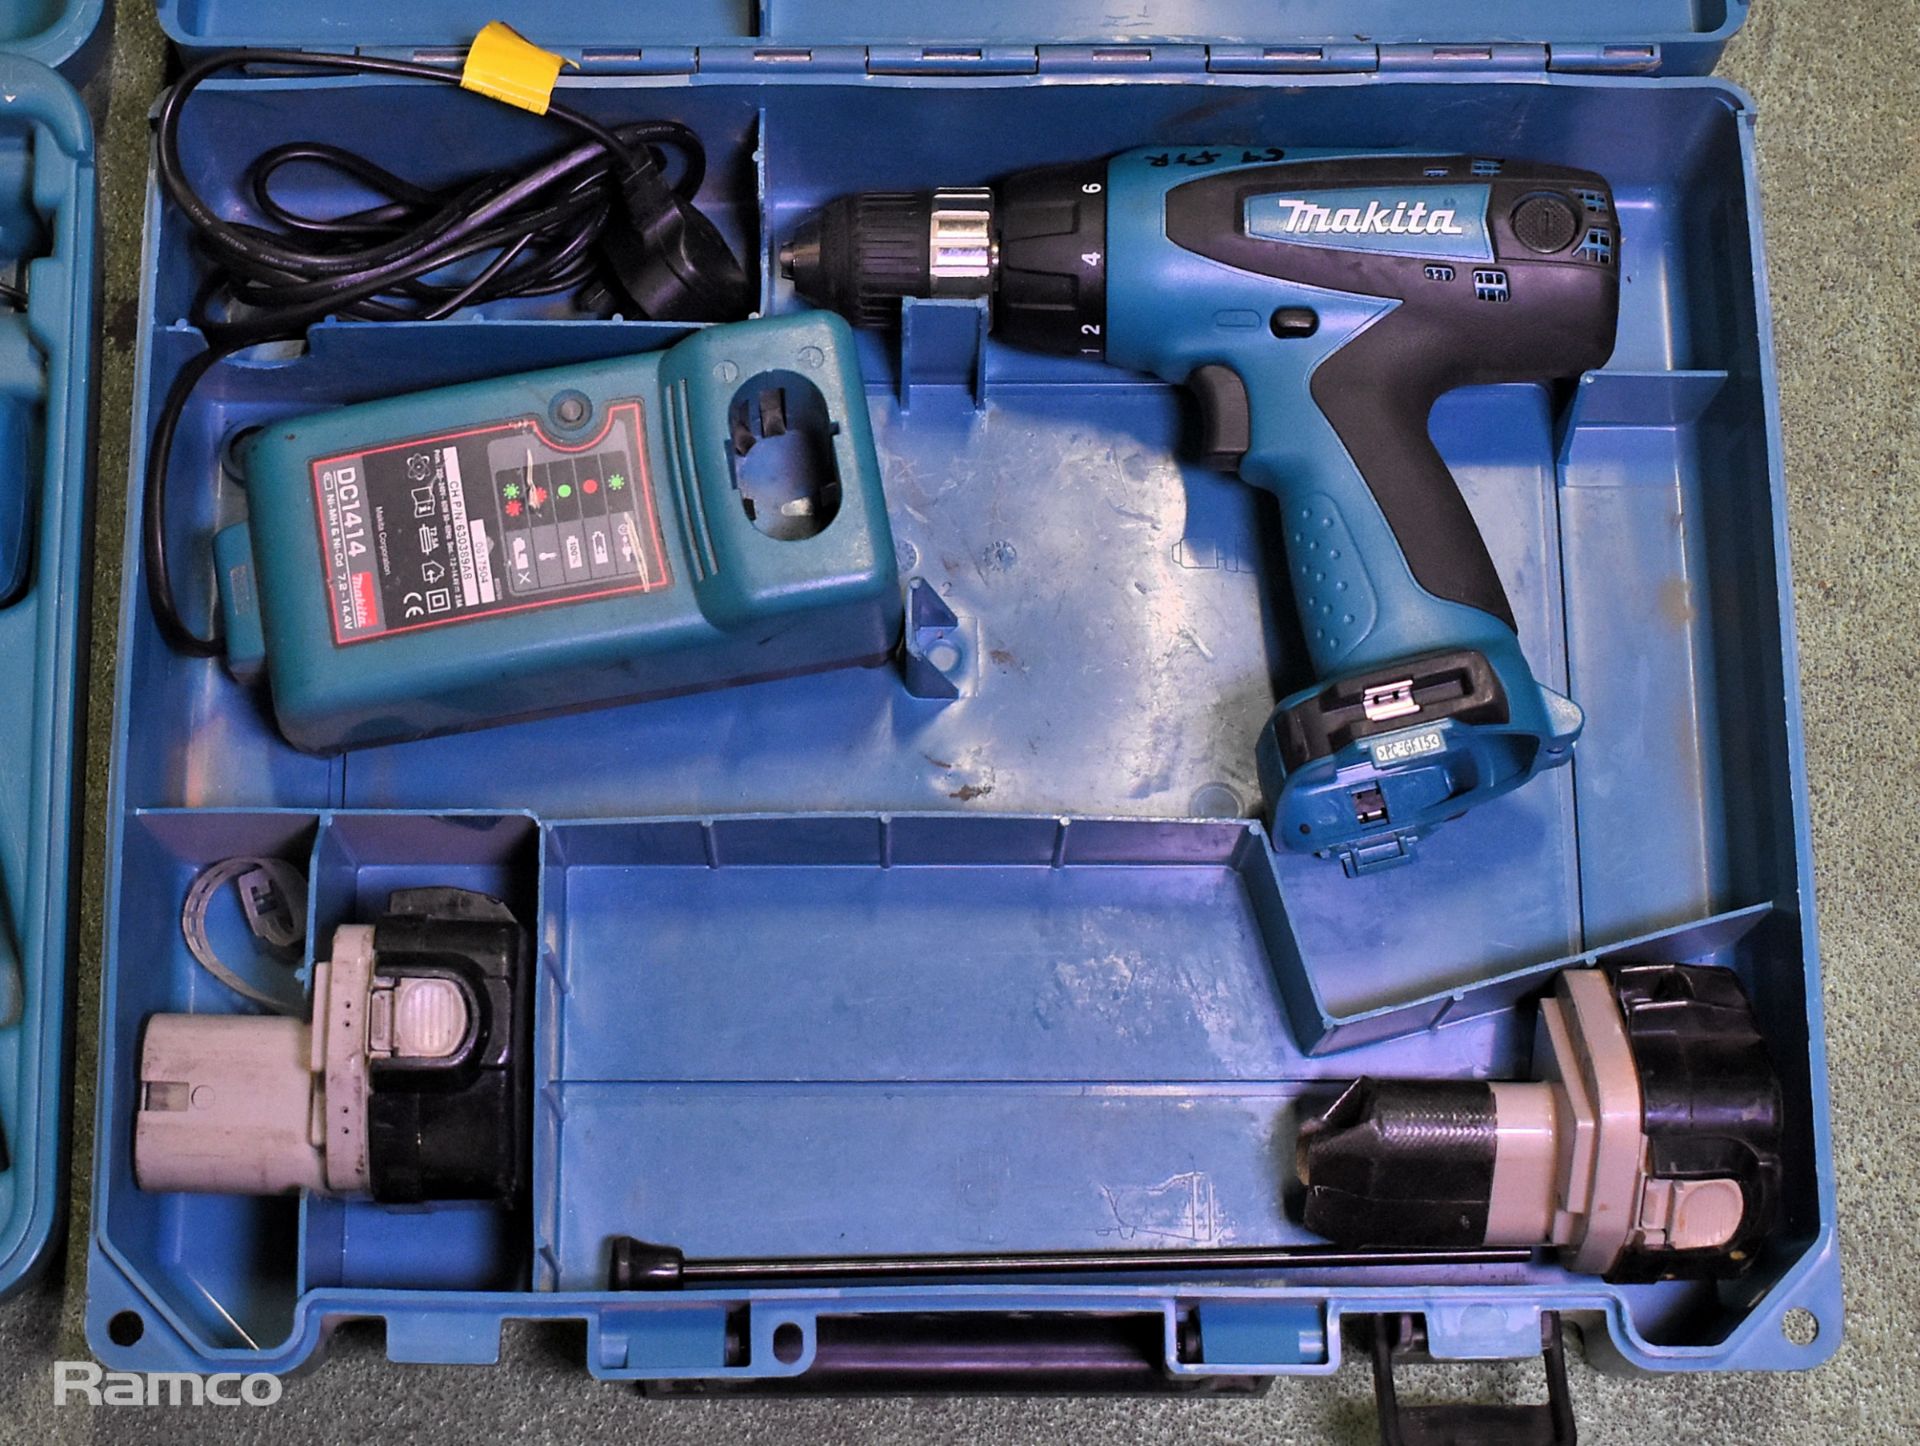 2x Makita 6317D cordless drill - DC1414 charger - 2x 12V batteries - case - Image 5 of 8